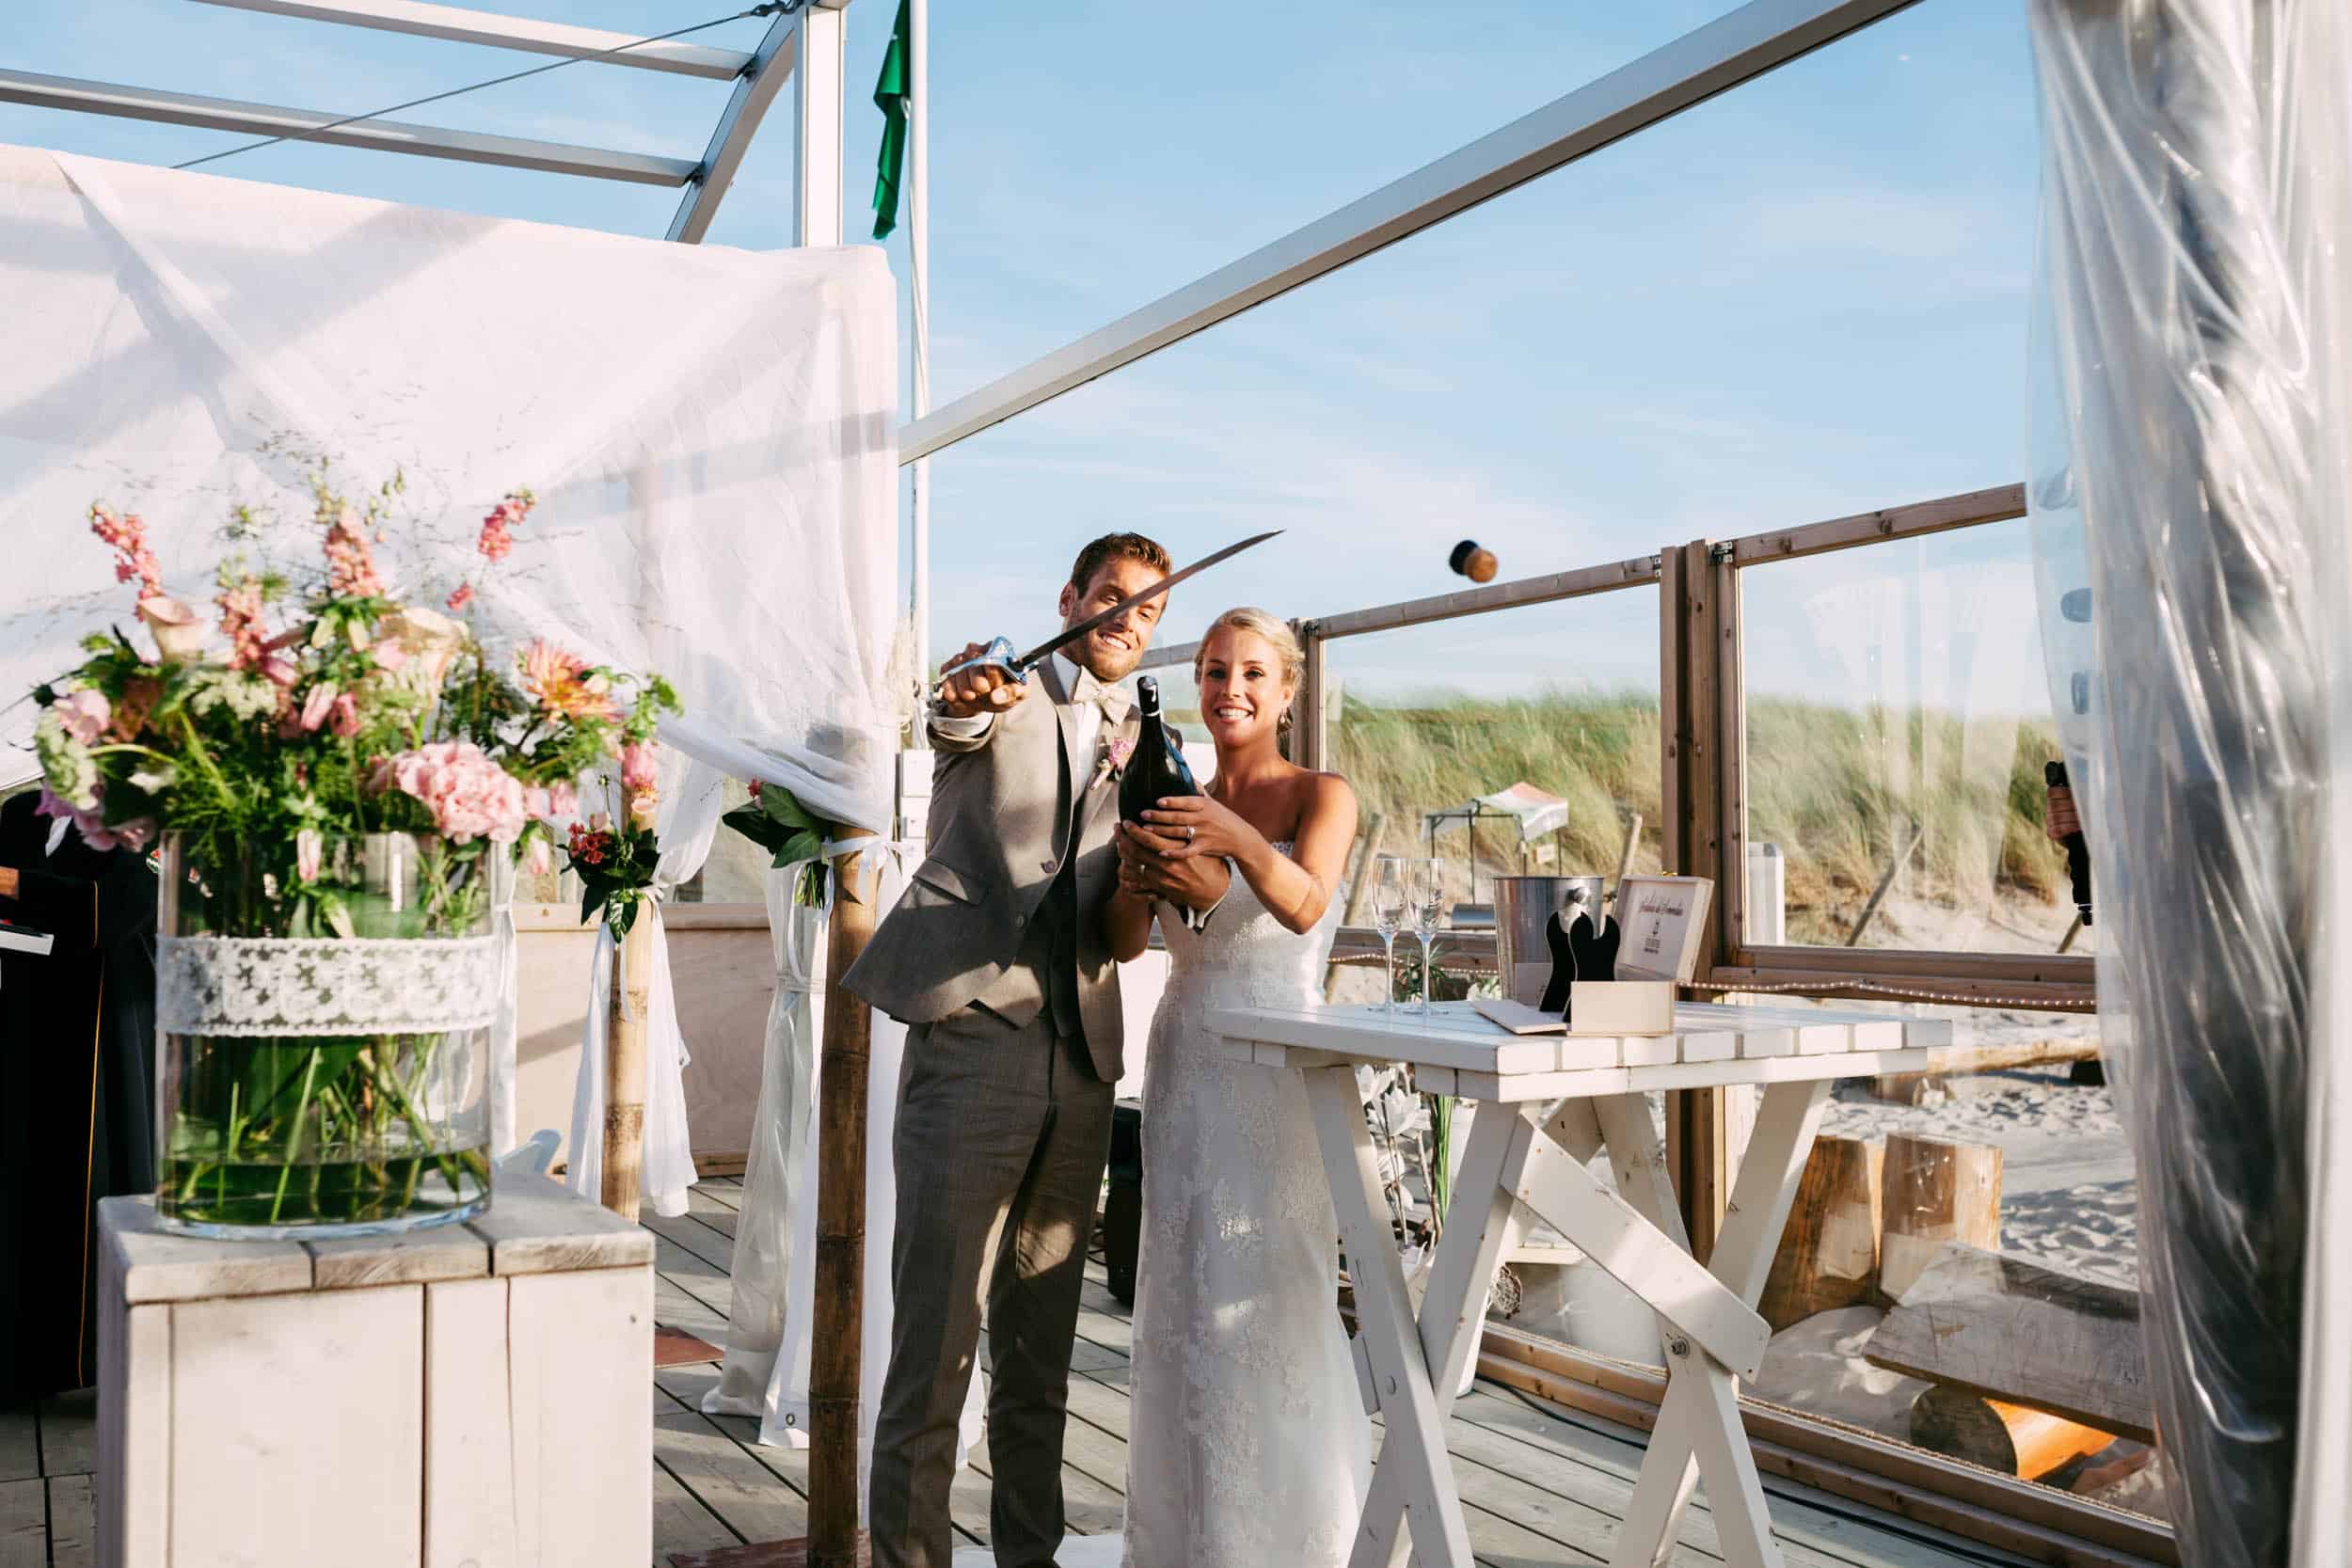 A bride and groom stand in front of a tent on the beach.